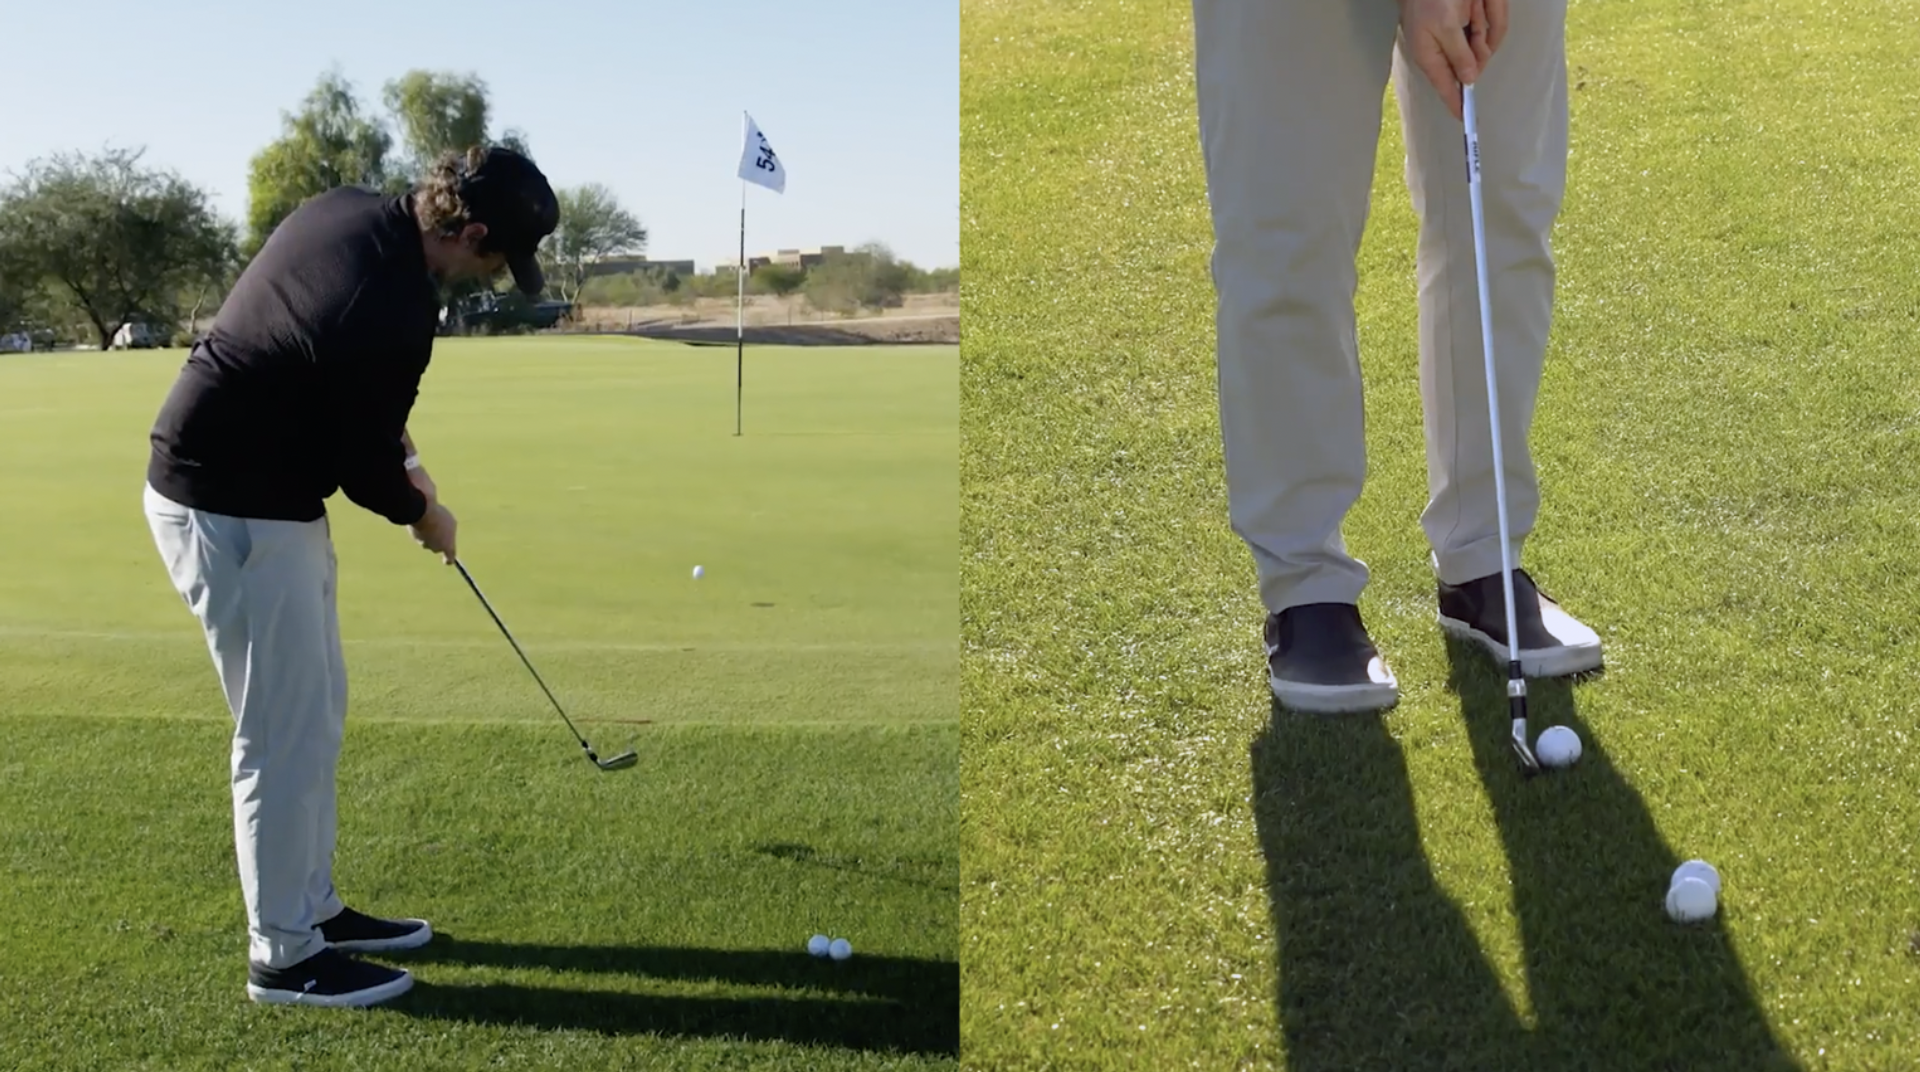 Using this 'putt chip' around the green will help improve your short game